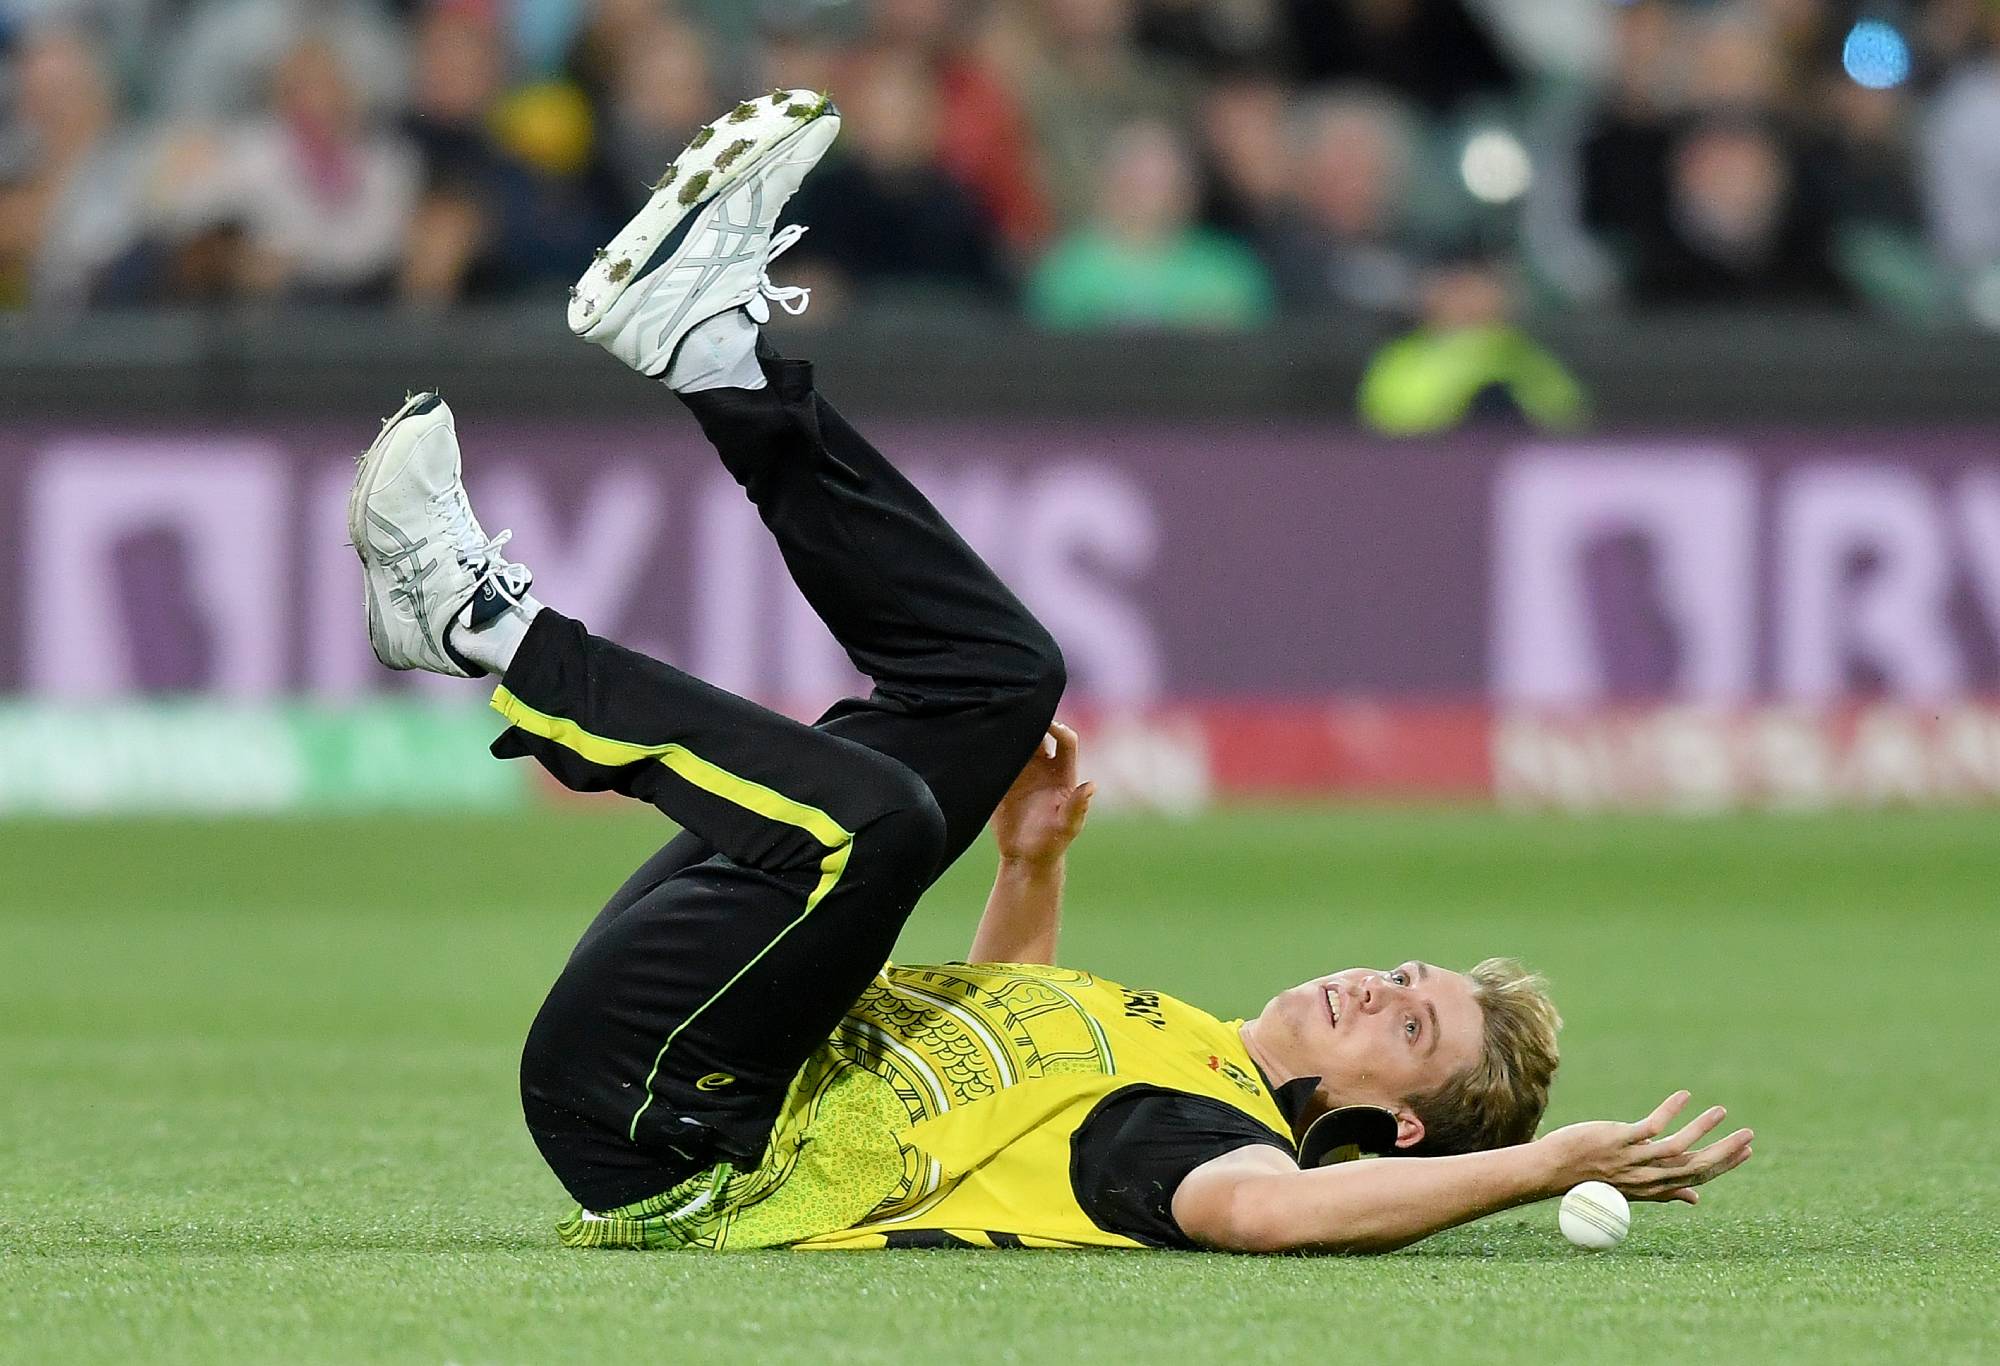 ADELAIDE, AUSTRALIA - NOVEMBER 04: Cameron Green of Australia fields during the ICC Men's T20 World Cup match between Australia and Afghanistan at Adelaide Oval on November 04, 2022 in Adelaide, Australia. (Photo by Mark Brake-ICC/ICC via Getty Images)